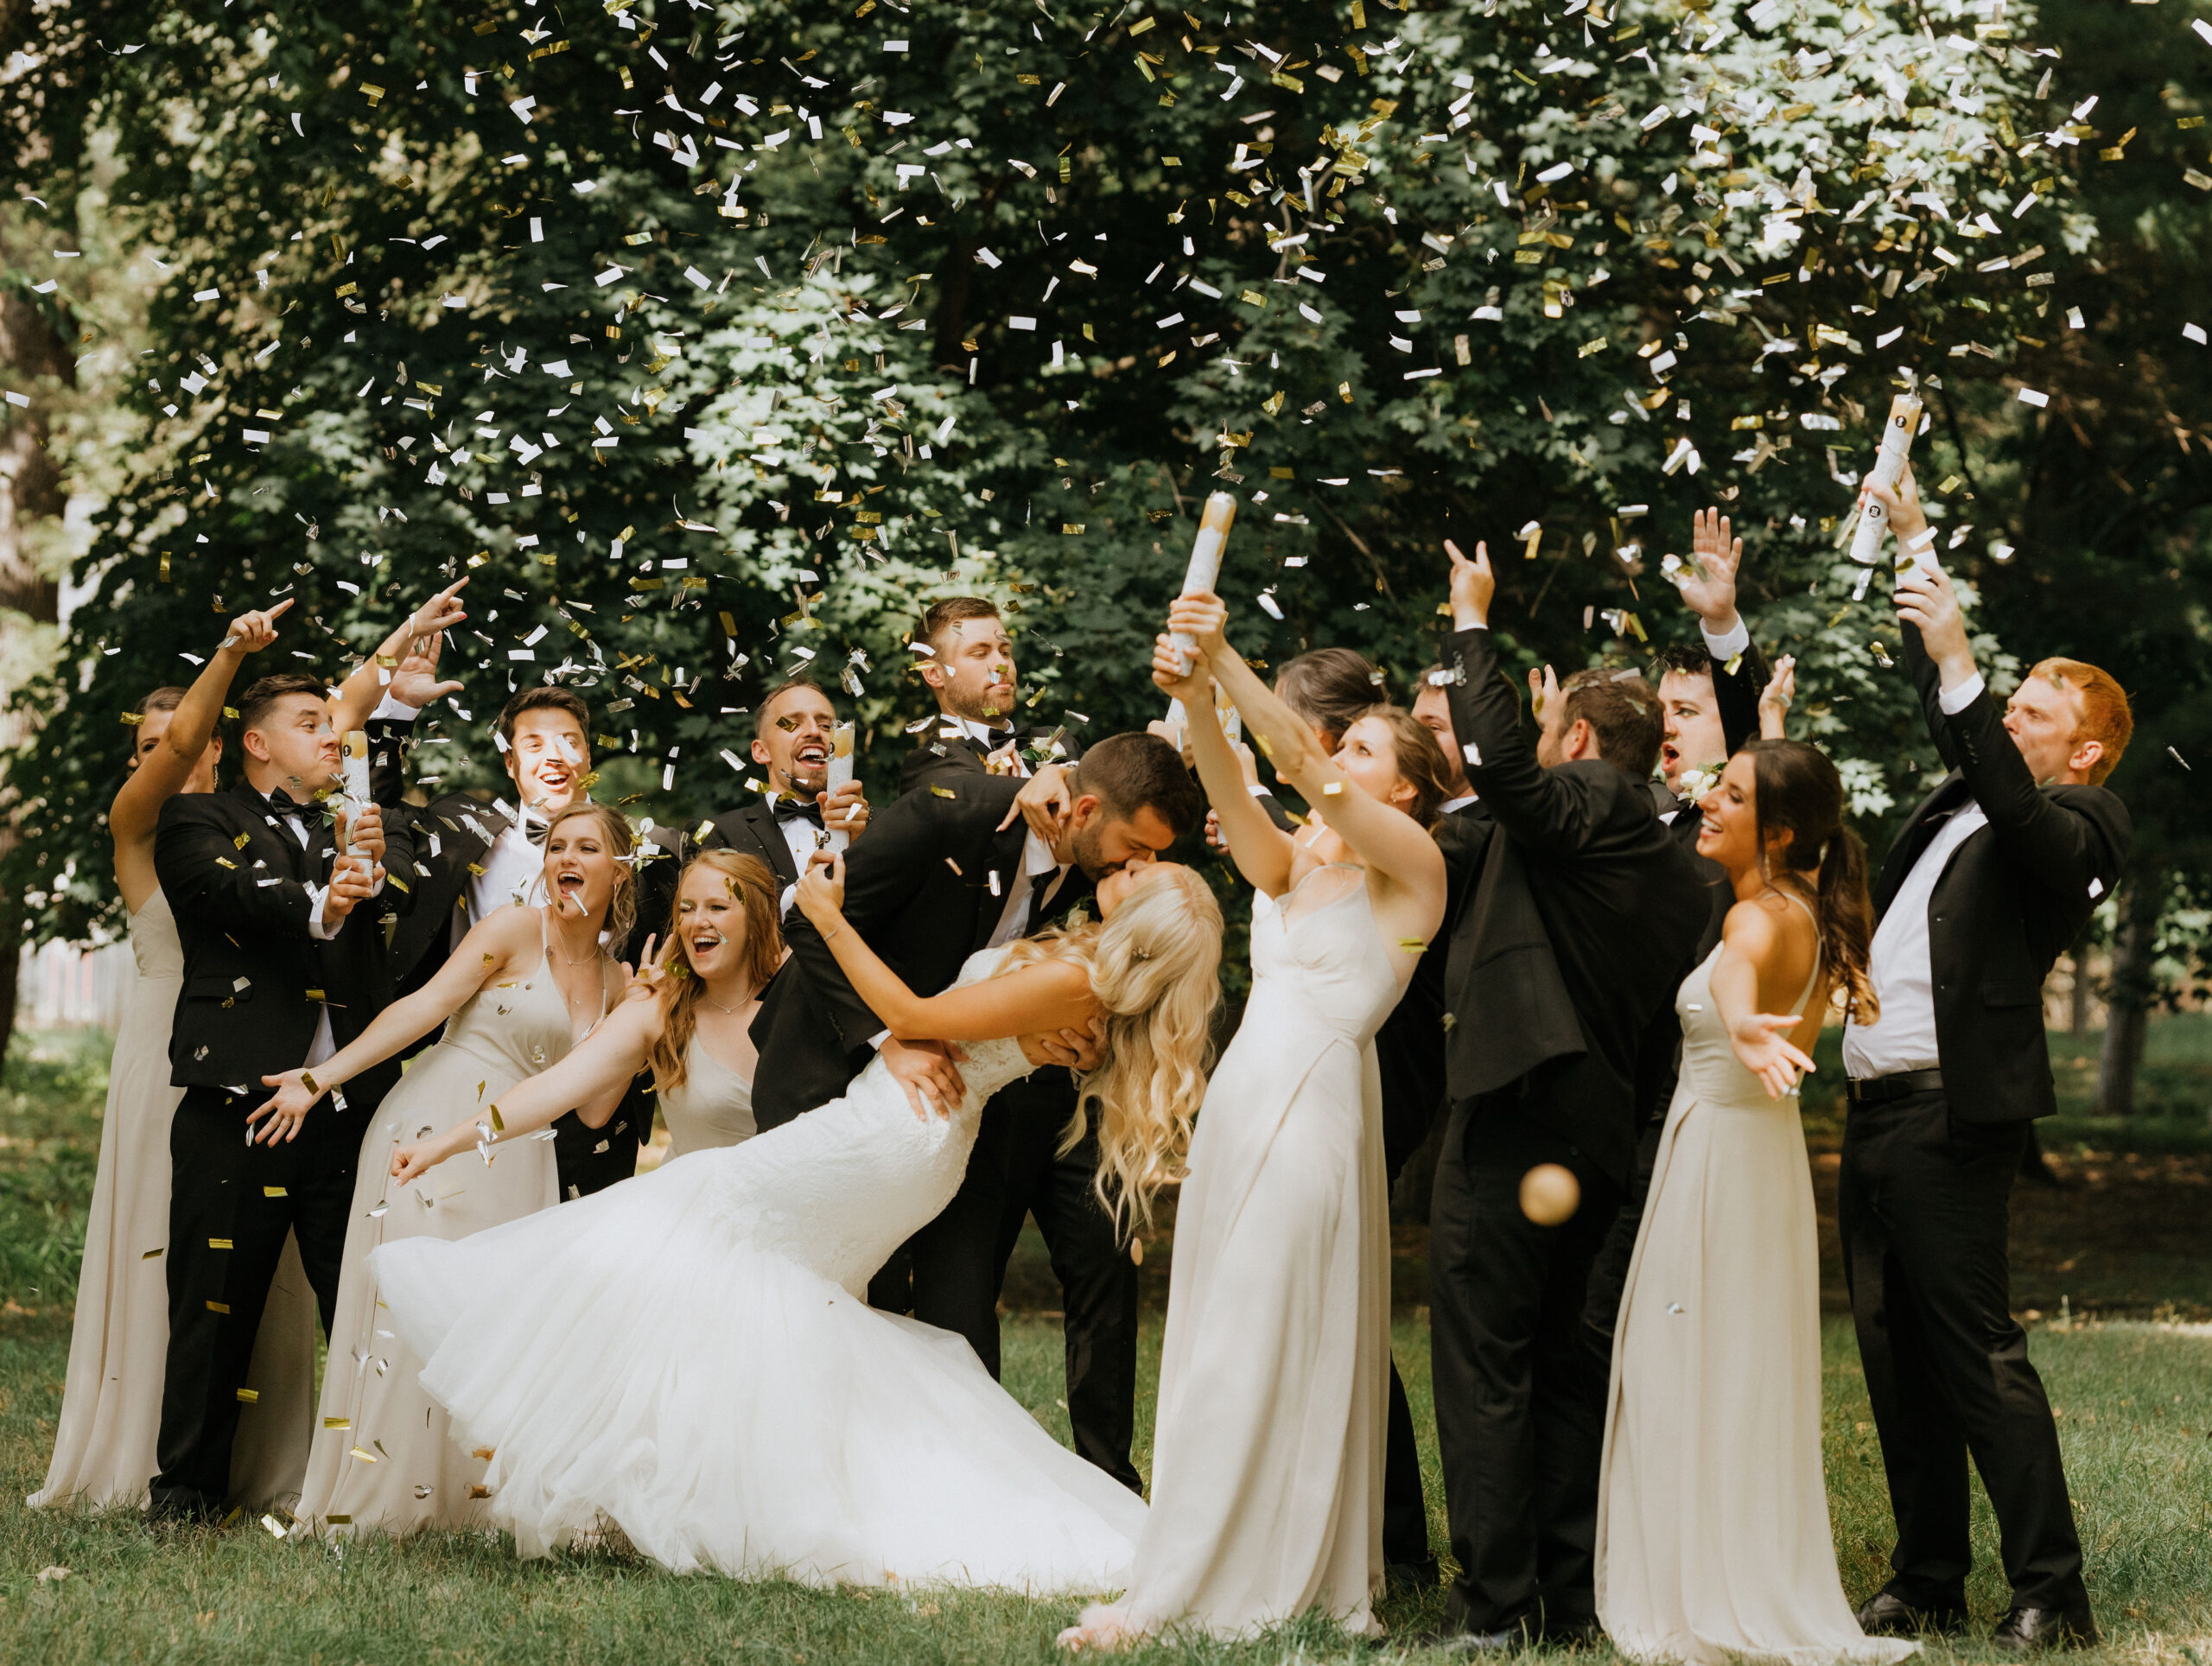 Wedding party celebrating with confetti at a park